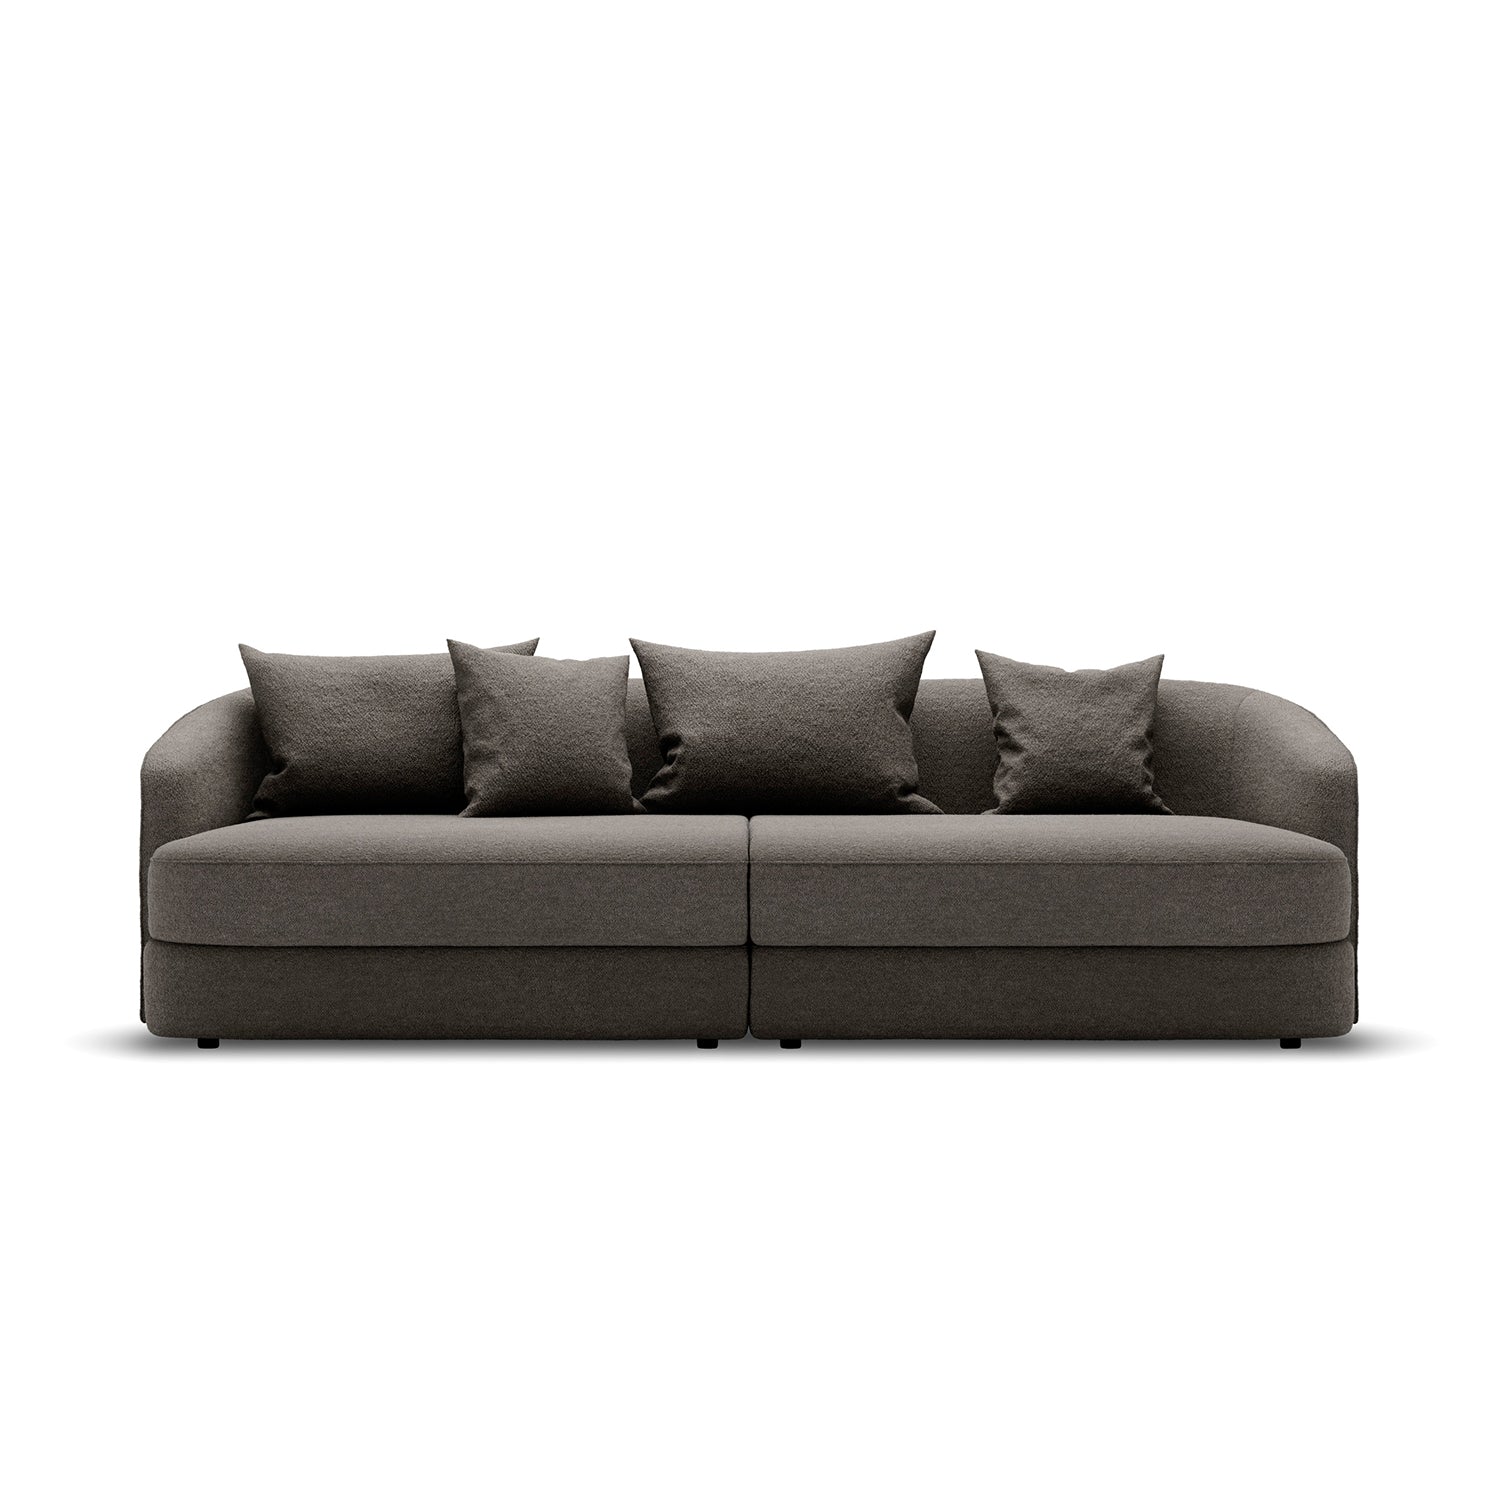 New Works Covent Residential Sofa in dark taupe